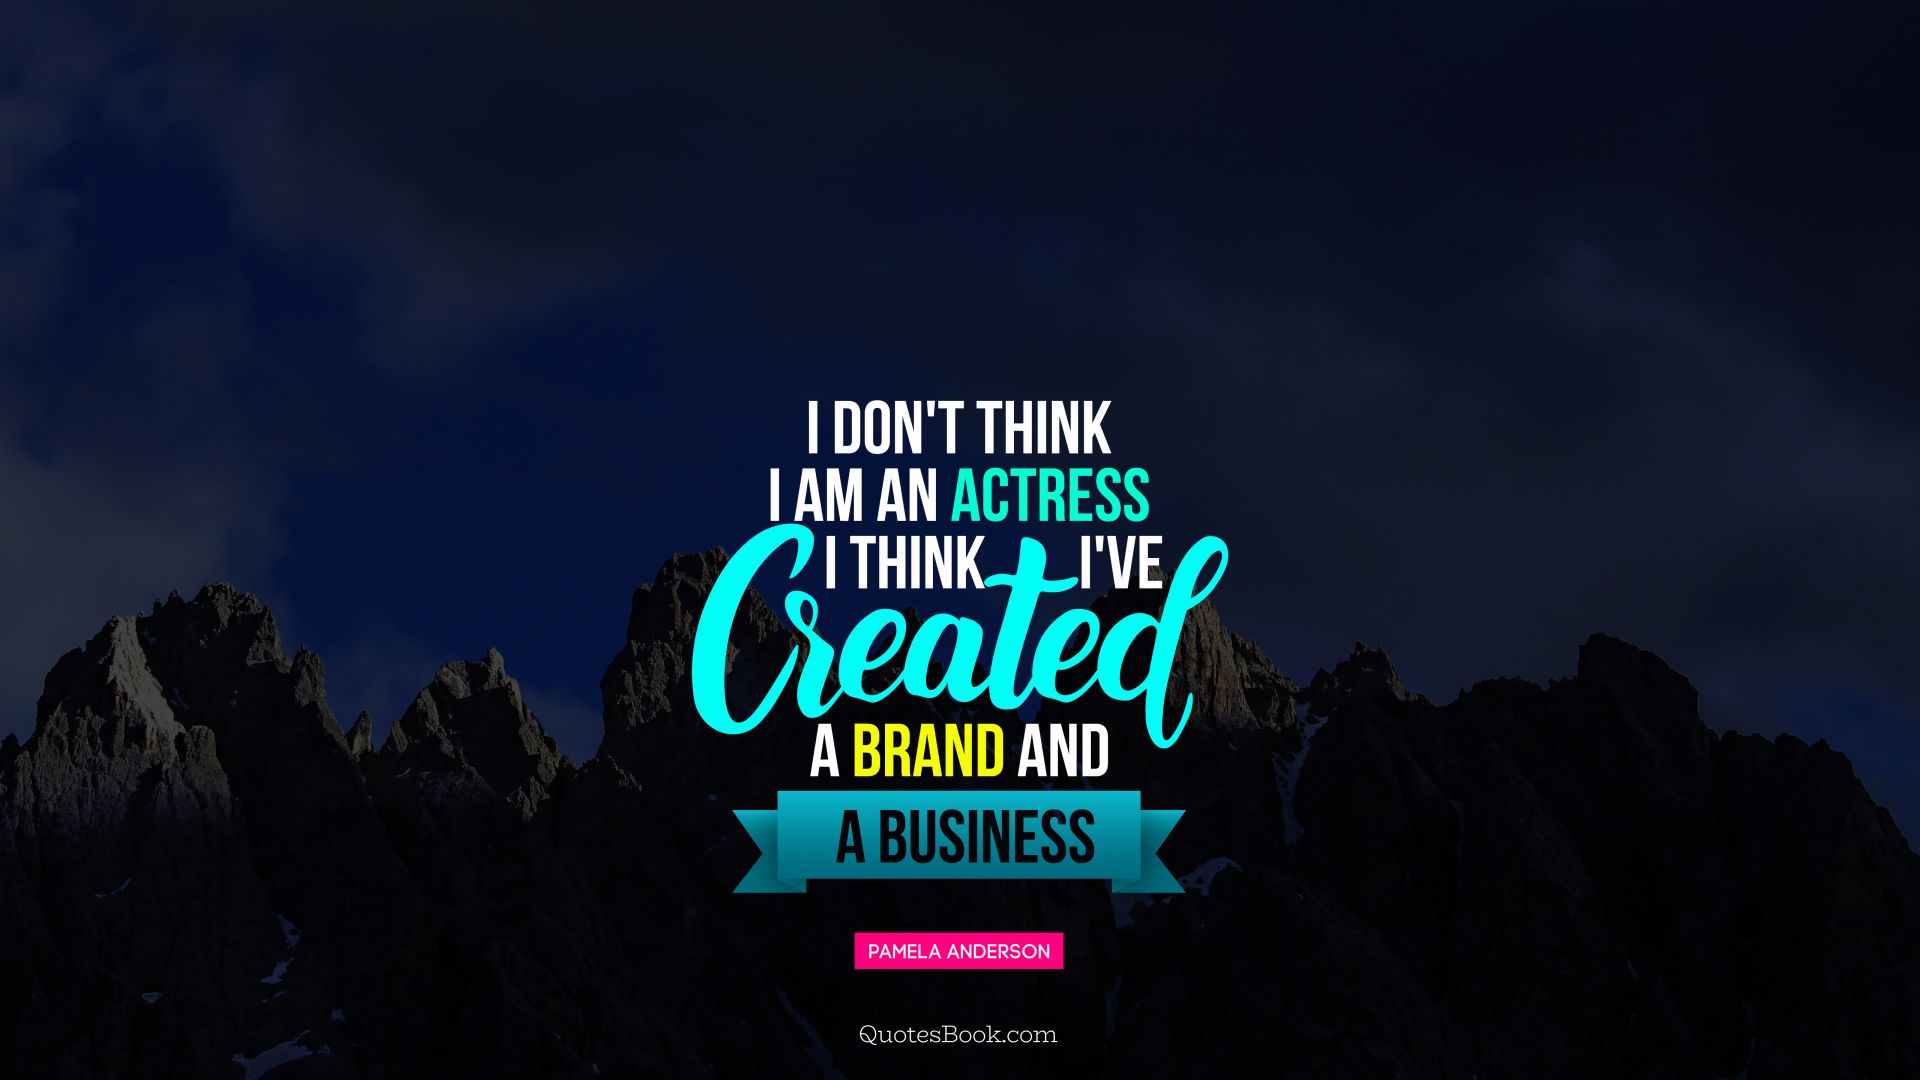 I don't think I am an actress I think I've created a brand and a business. - Quote by Pamela Anderson